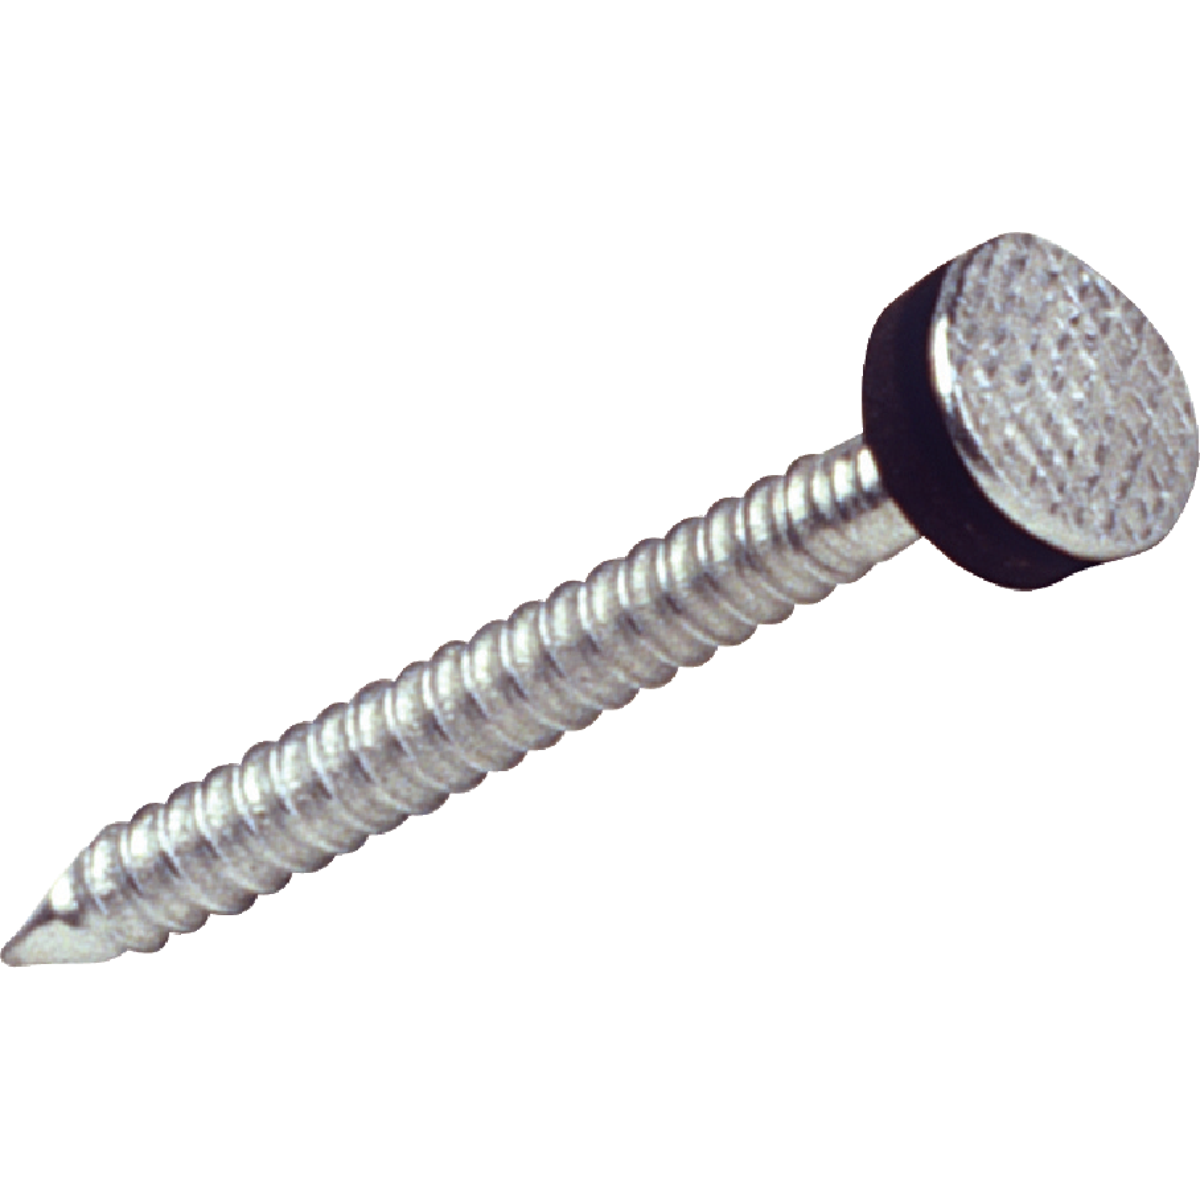 GripRite 13/4 In. 10 ga Hot Galvanized Roofing Washer Nails (5350 Ct., 50 Lb.) eBay